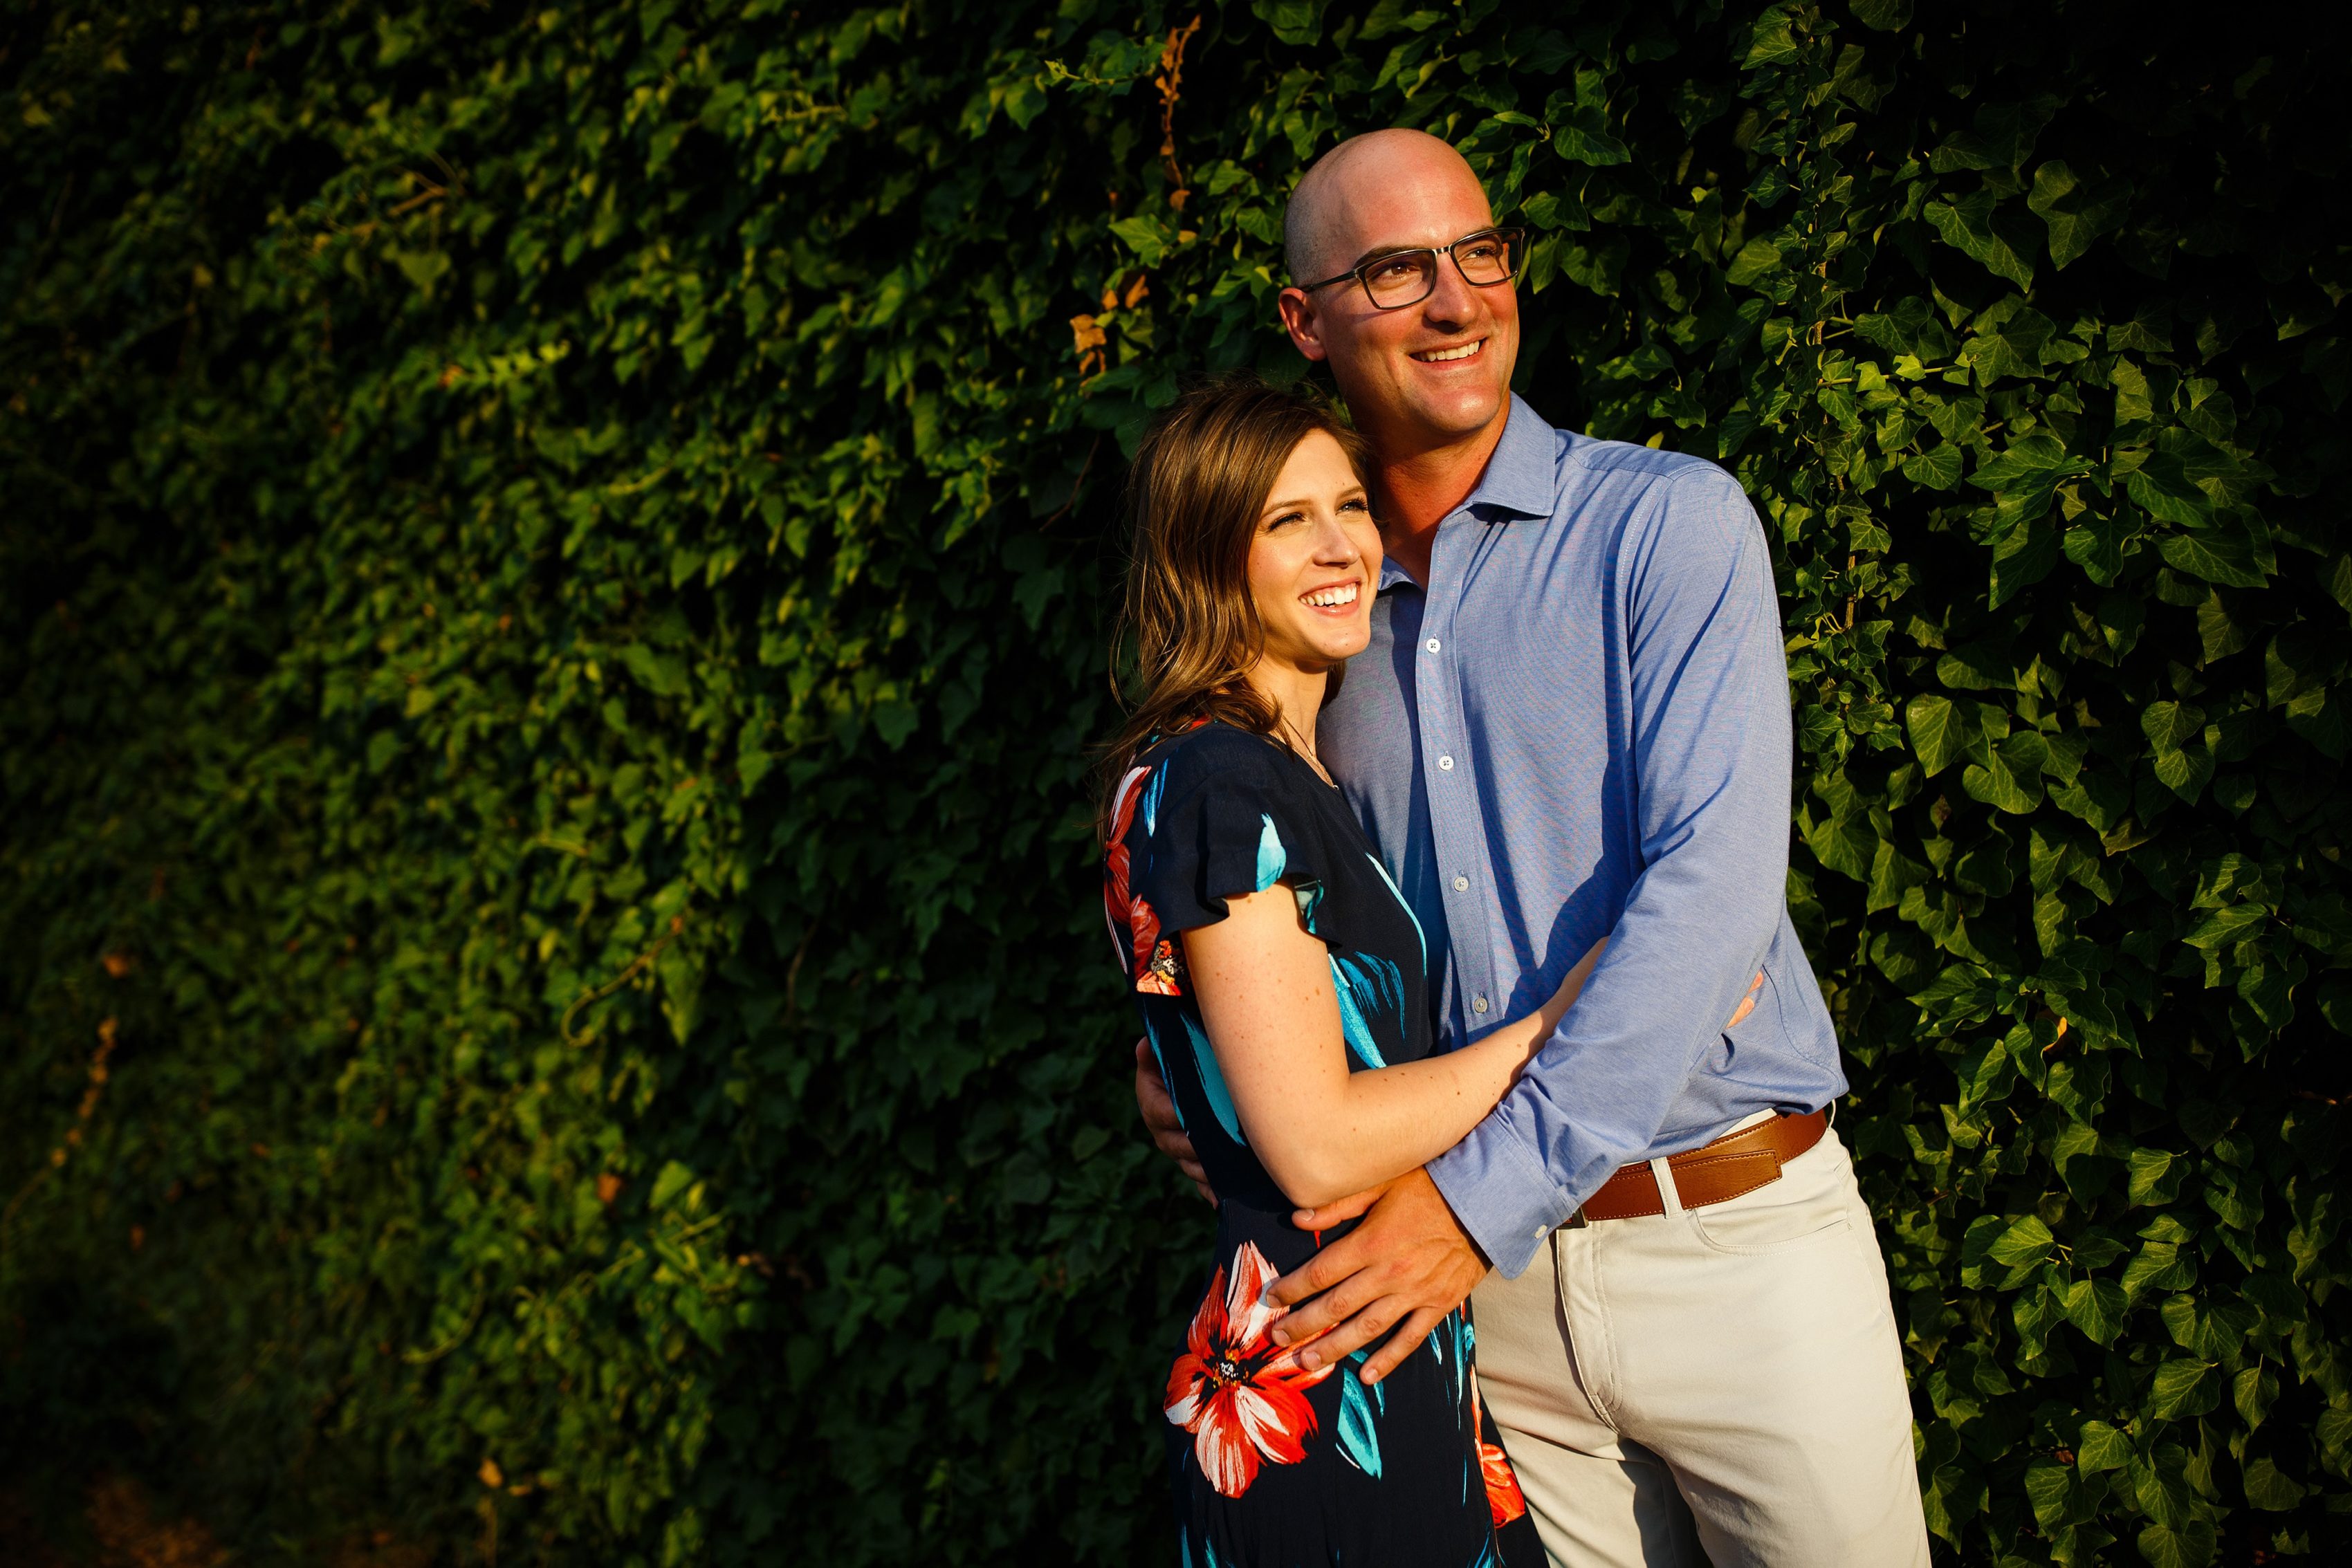 Cody and Erica share a laugh during their engagement photos in Royal Oak, Michigan